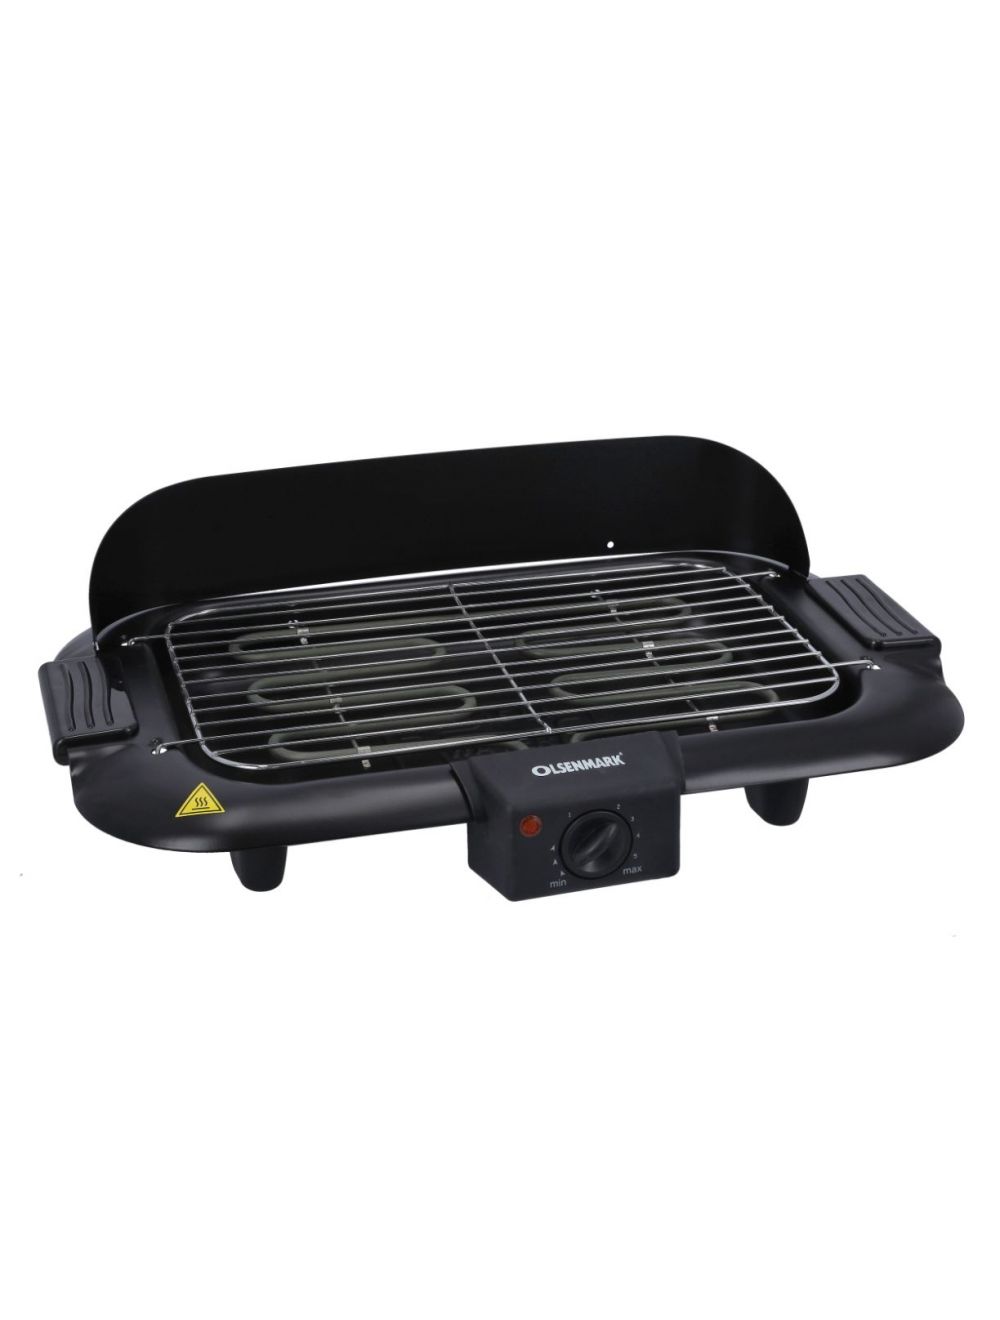 Olsenmark Open Air Barbecue Grill, 2000W - Adjustable Thermostat - Operating On/Off Indicator Light - Baffle Plate - Removable Parts for Easy Cleaning